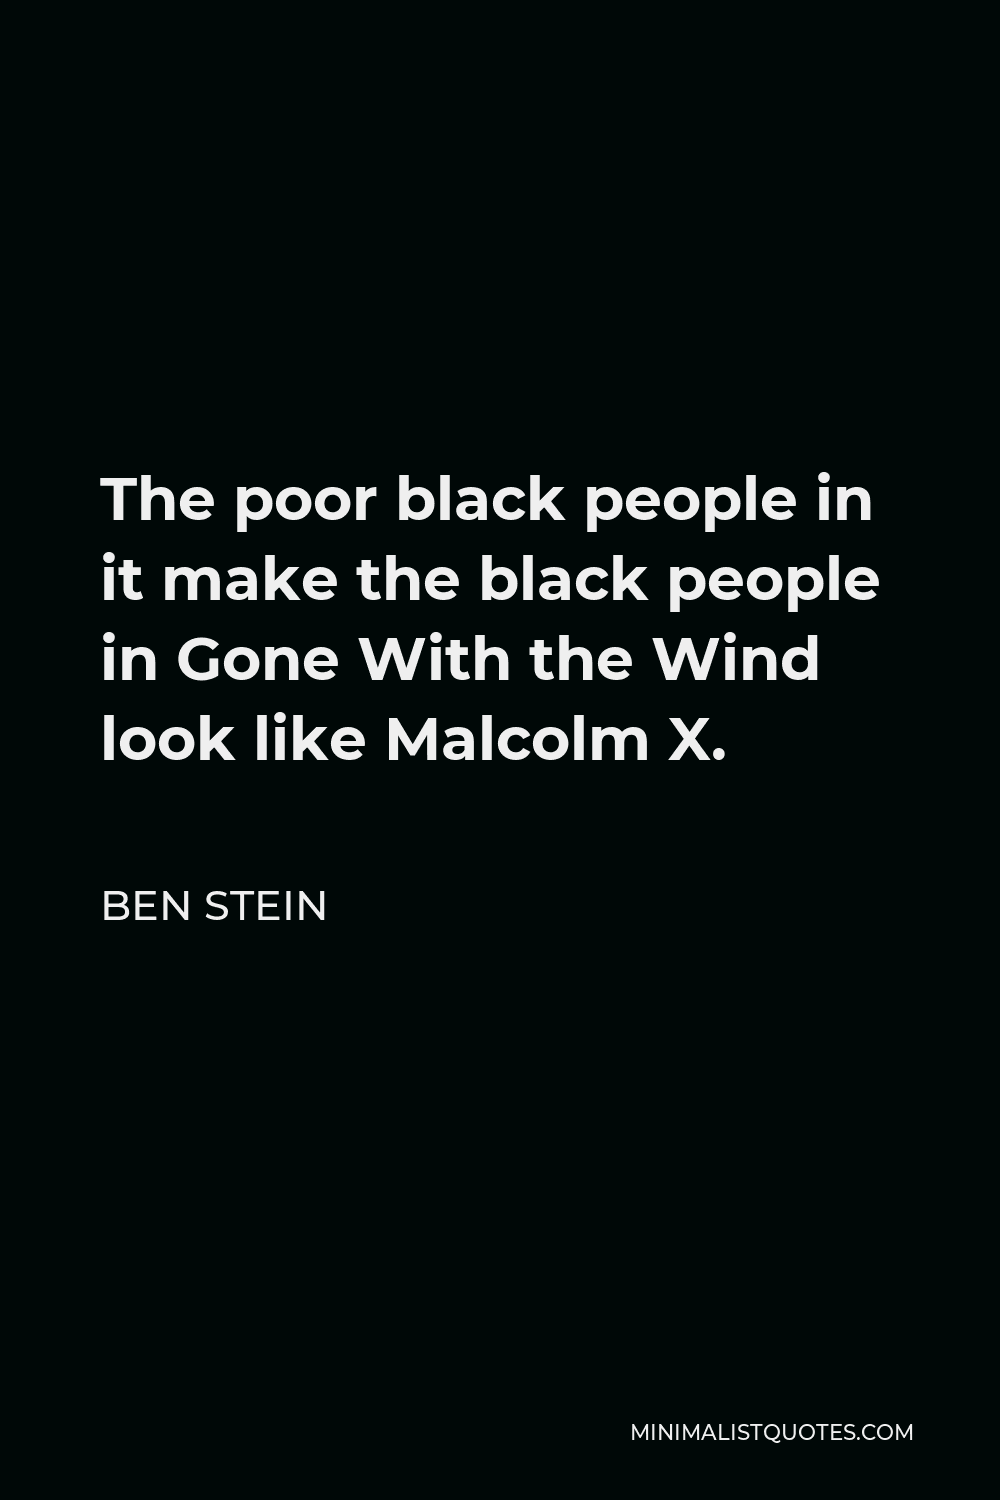 Ben Stein Quote - The poor black people in it make the black people in Gone With the Wind look like Malcolm X.